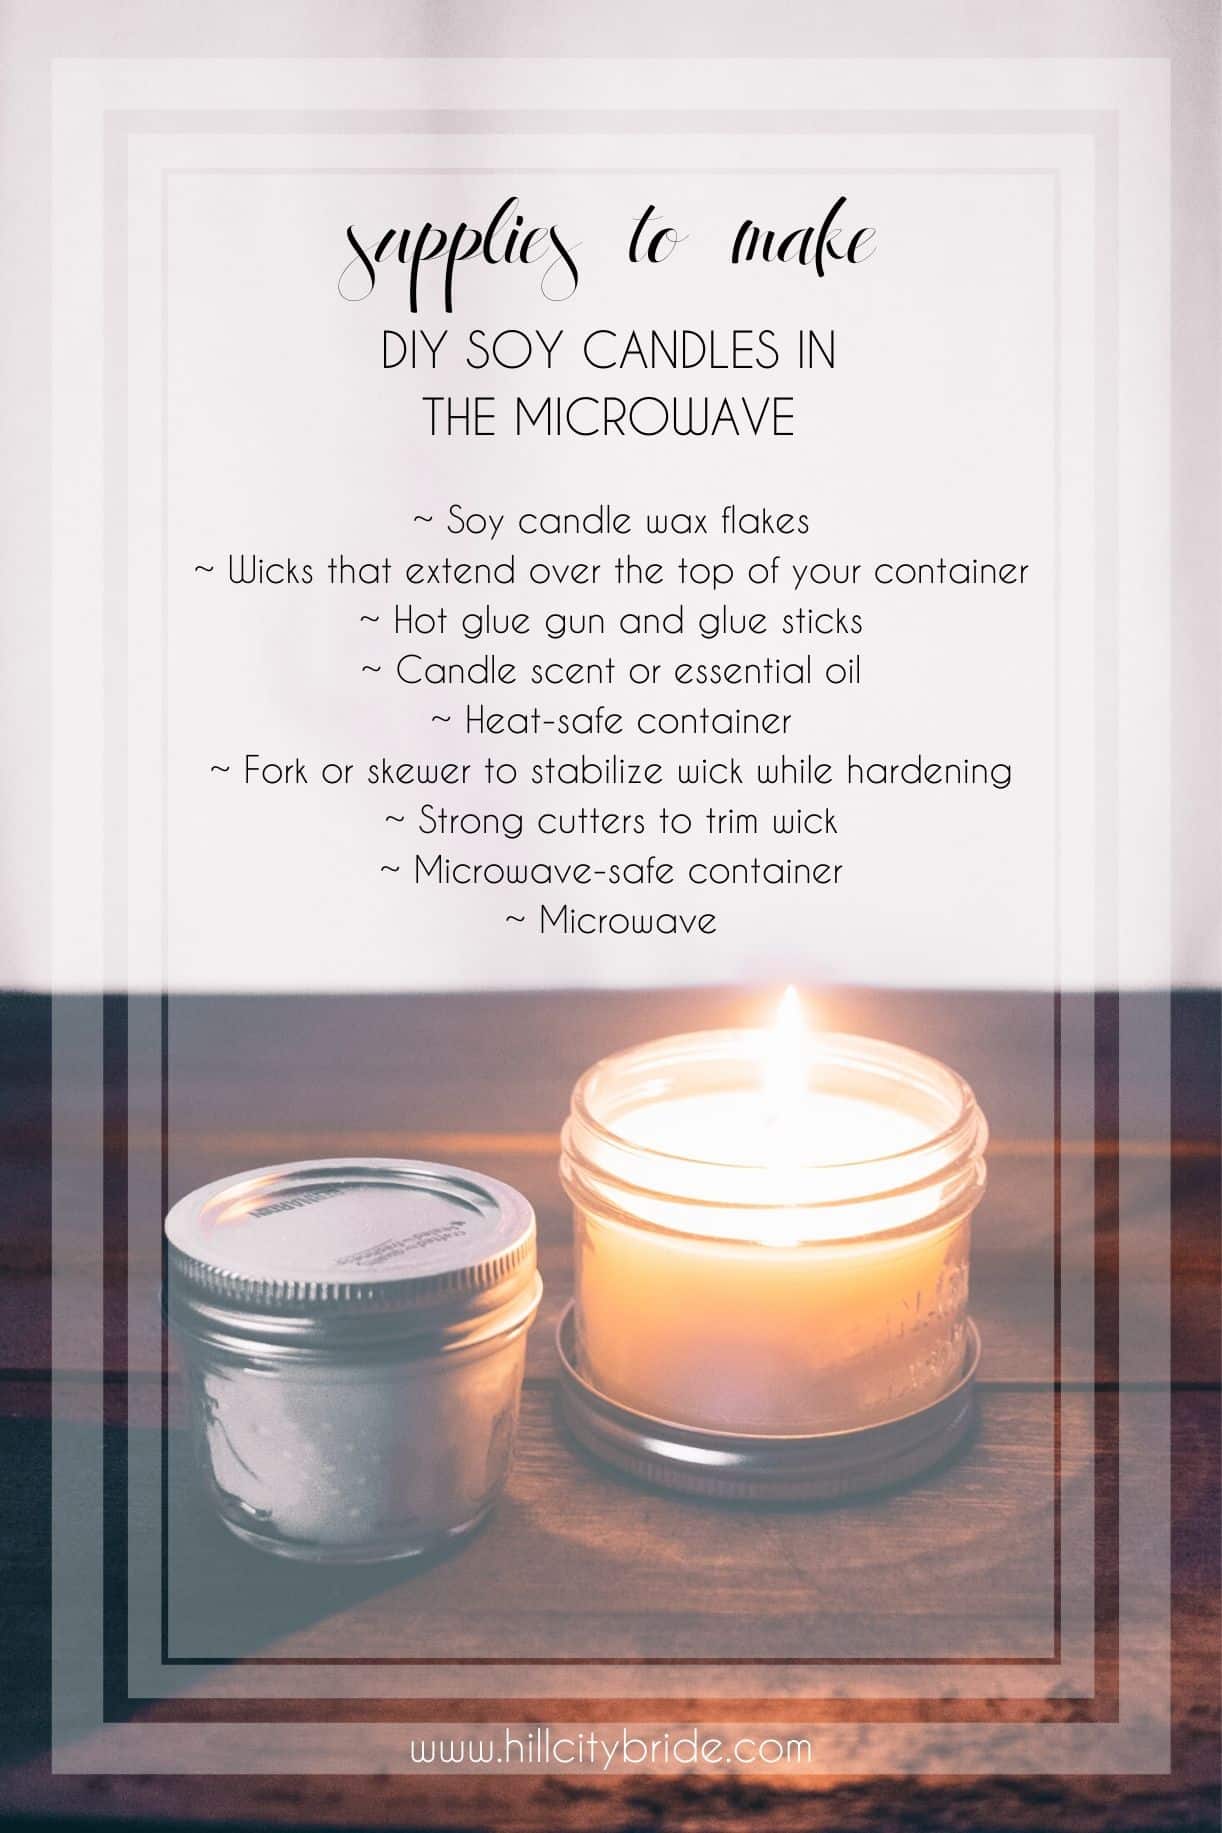 How to Make Soy Candles in the Microwave